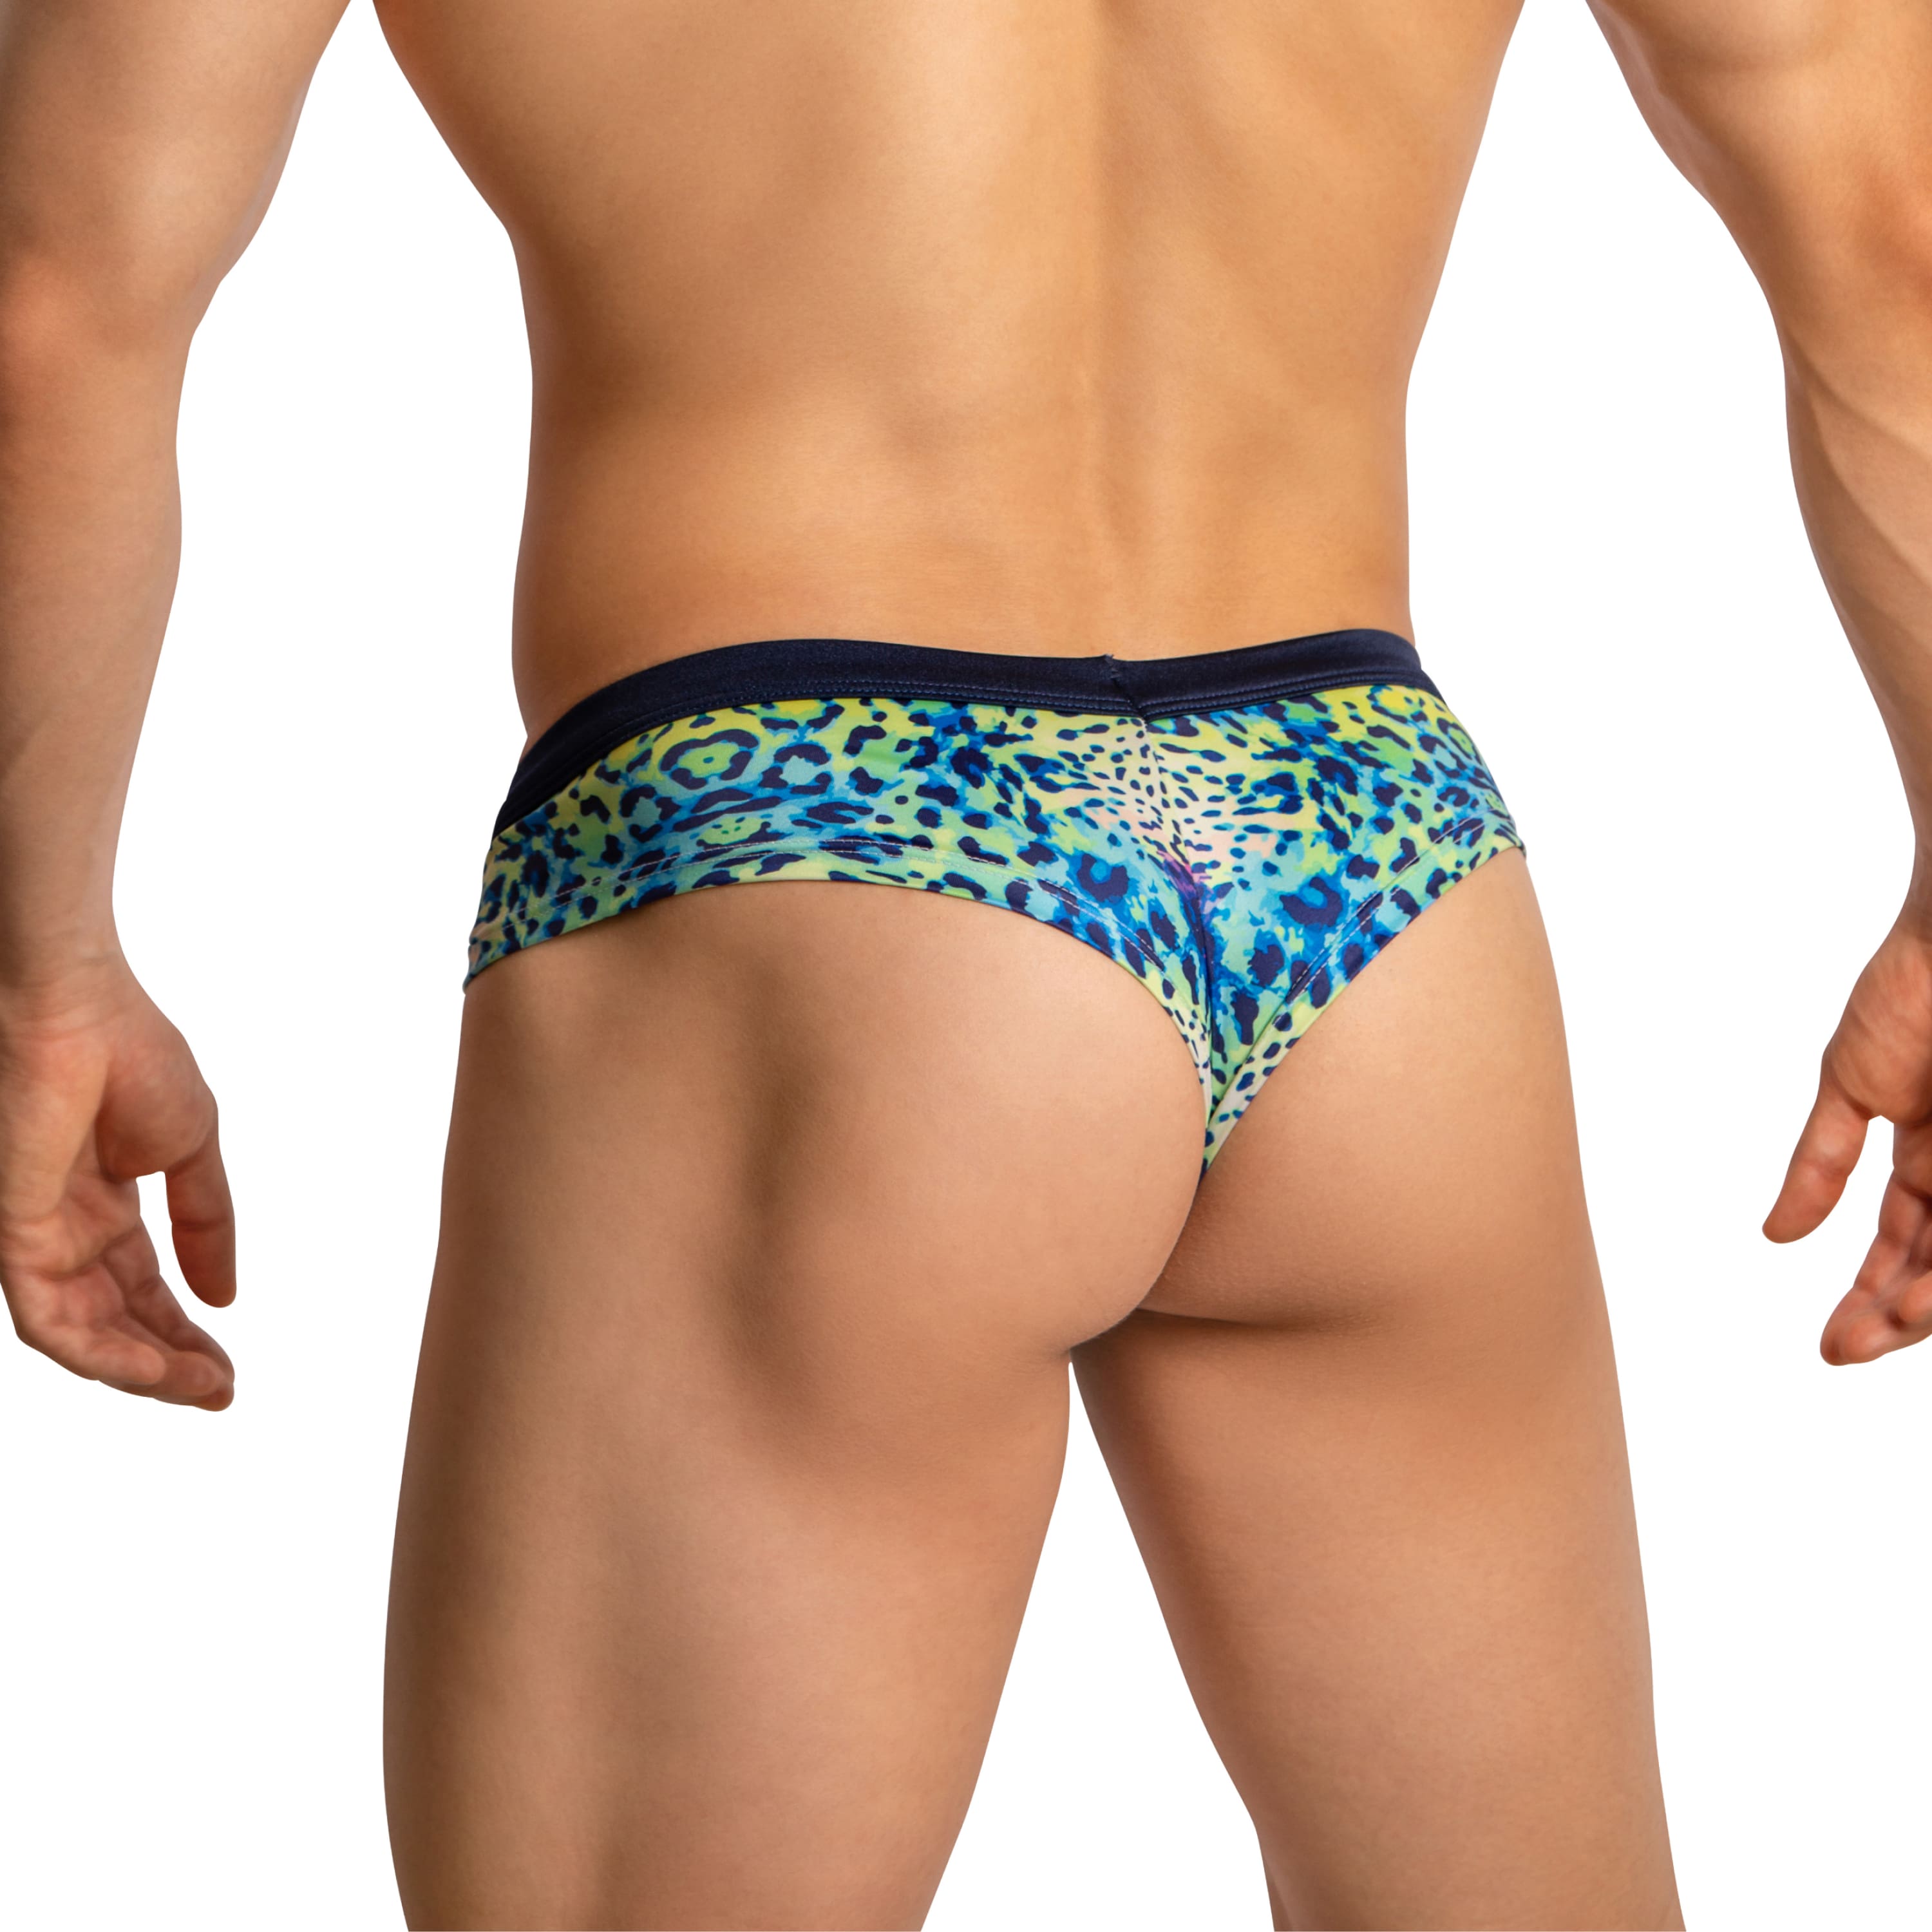 Daniel Alexander DAG014 Boxer Brief with eye-catching animal print Provocative Men's Underclothing